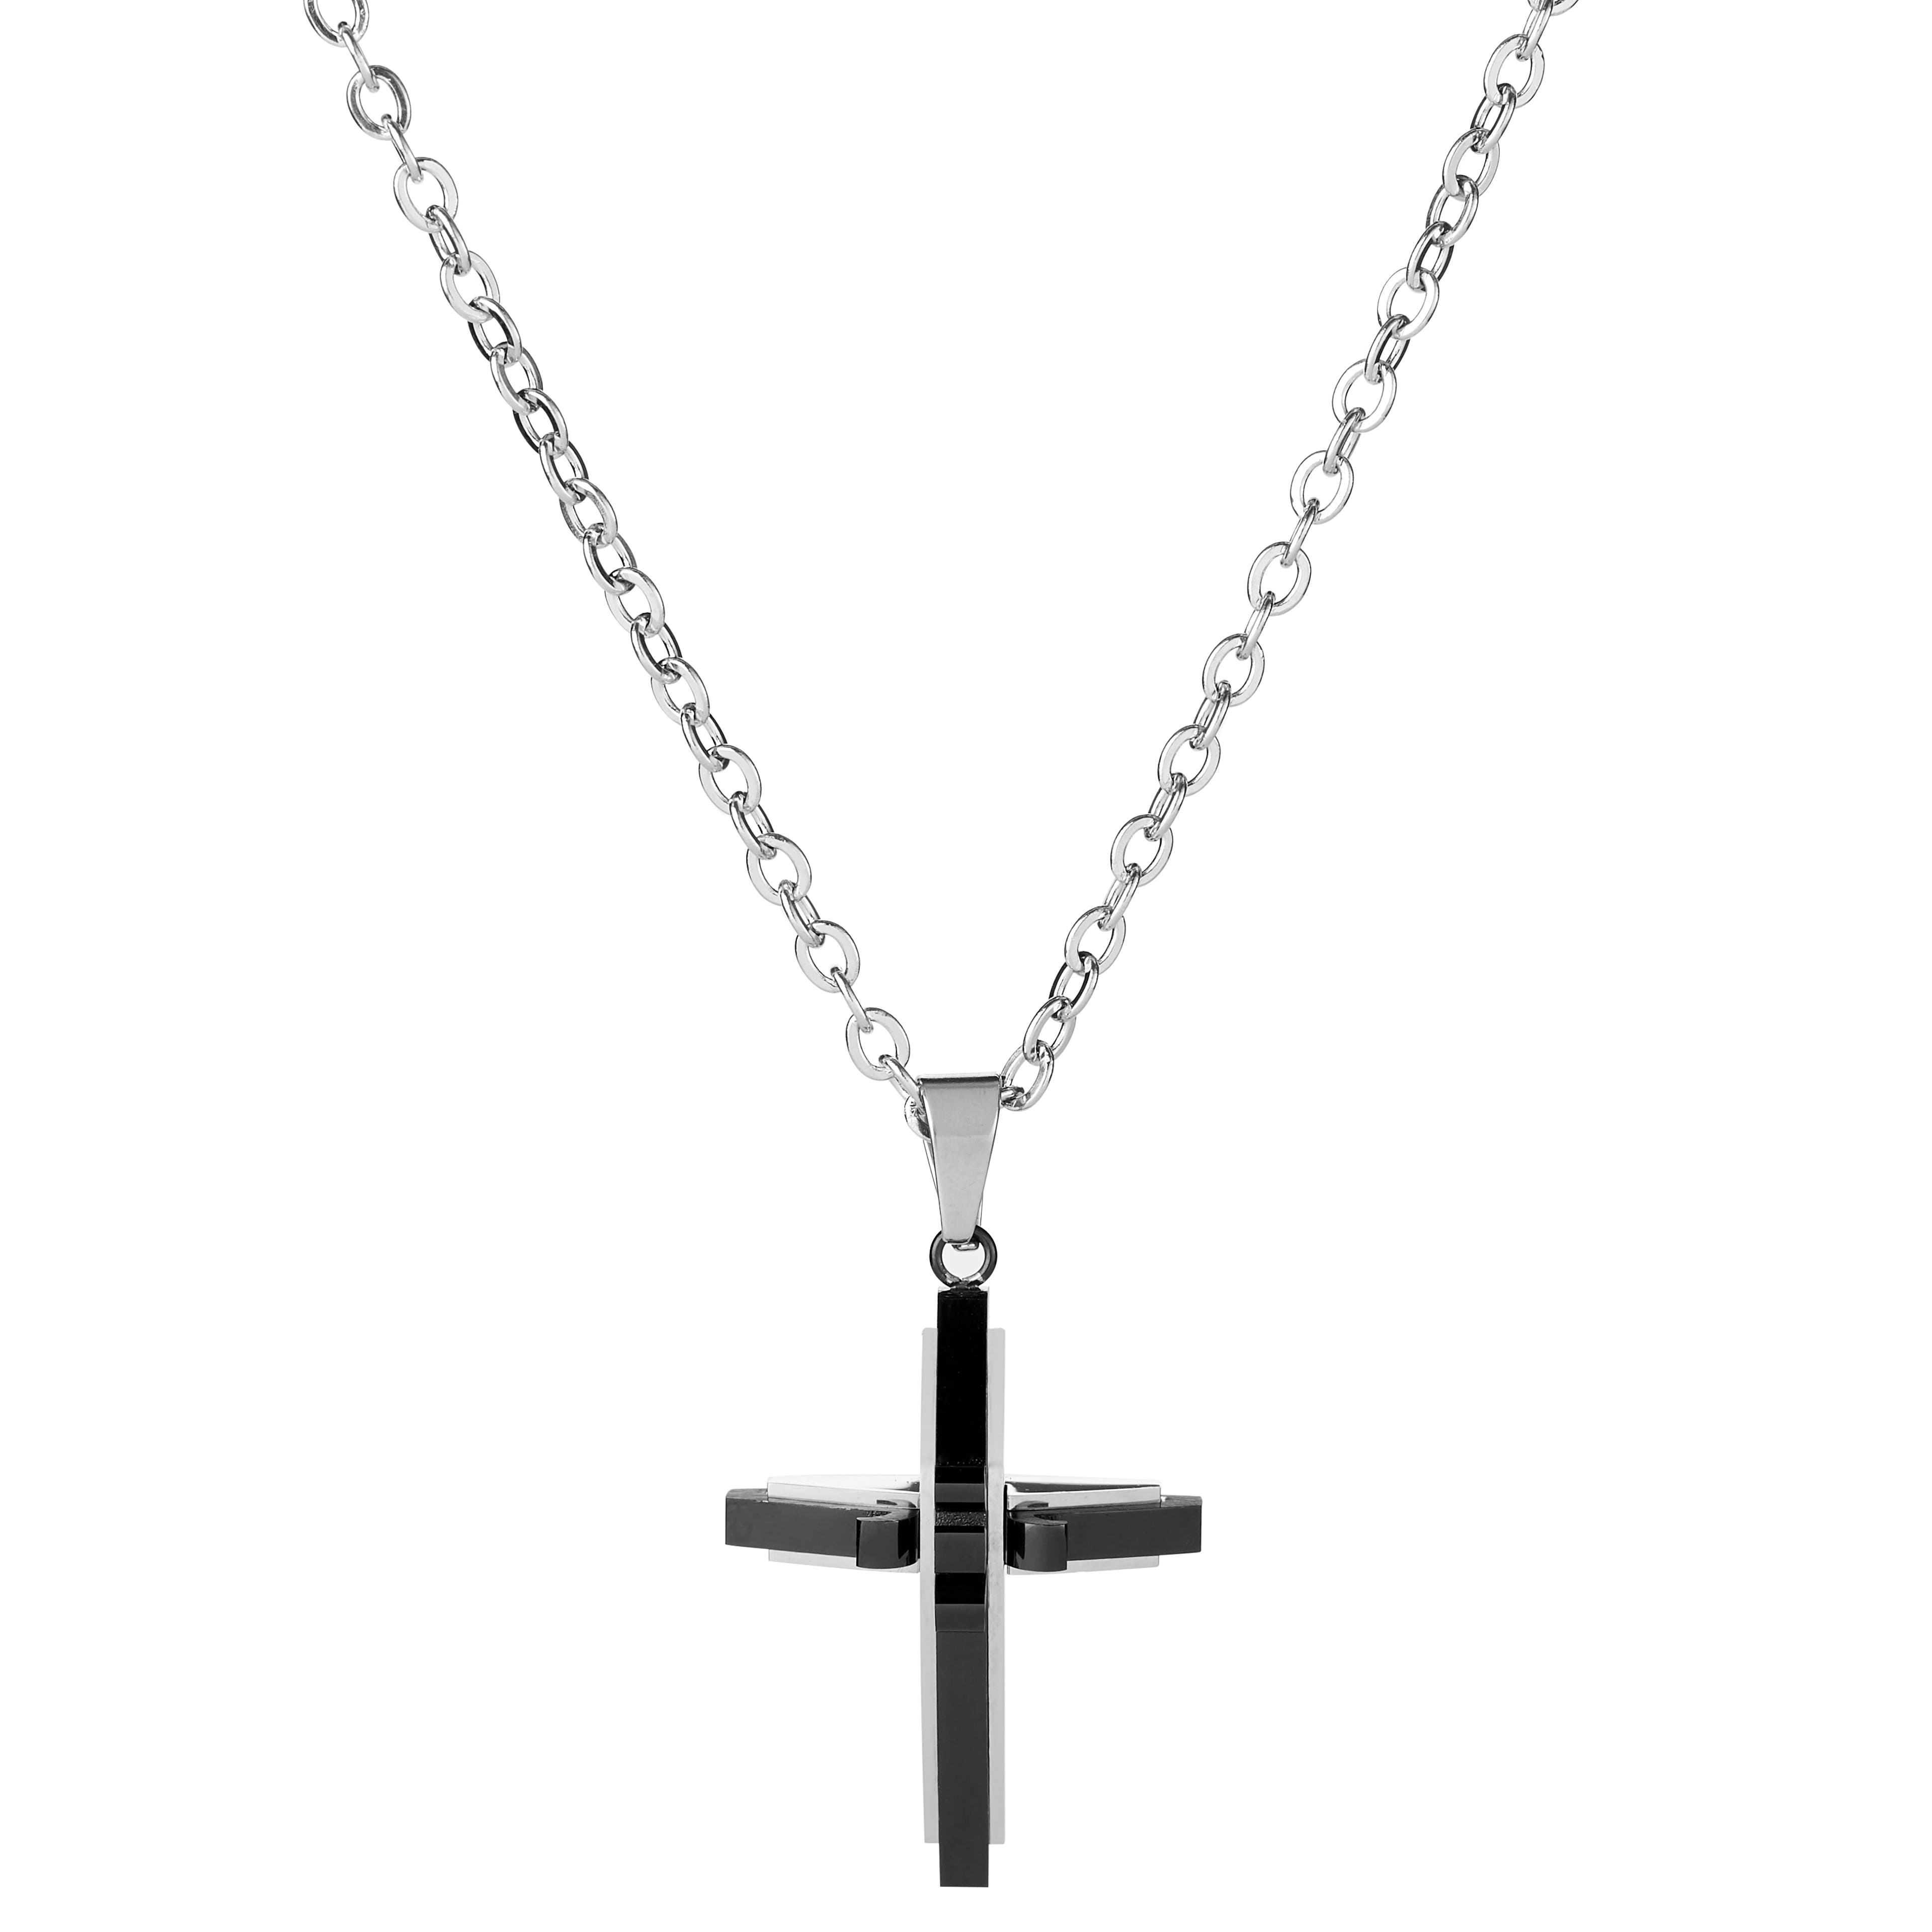 Silver-Tone & Black Stainless Steel Modern Cross Cable Chain Necklace